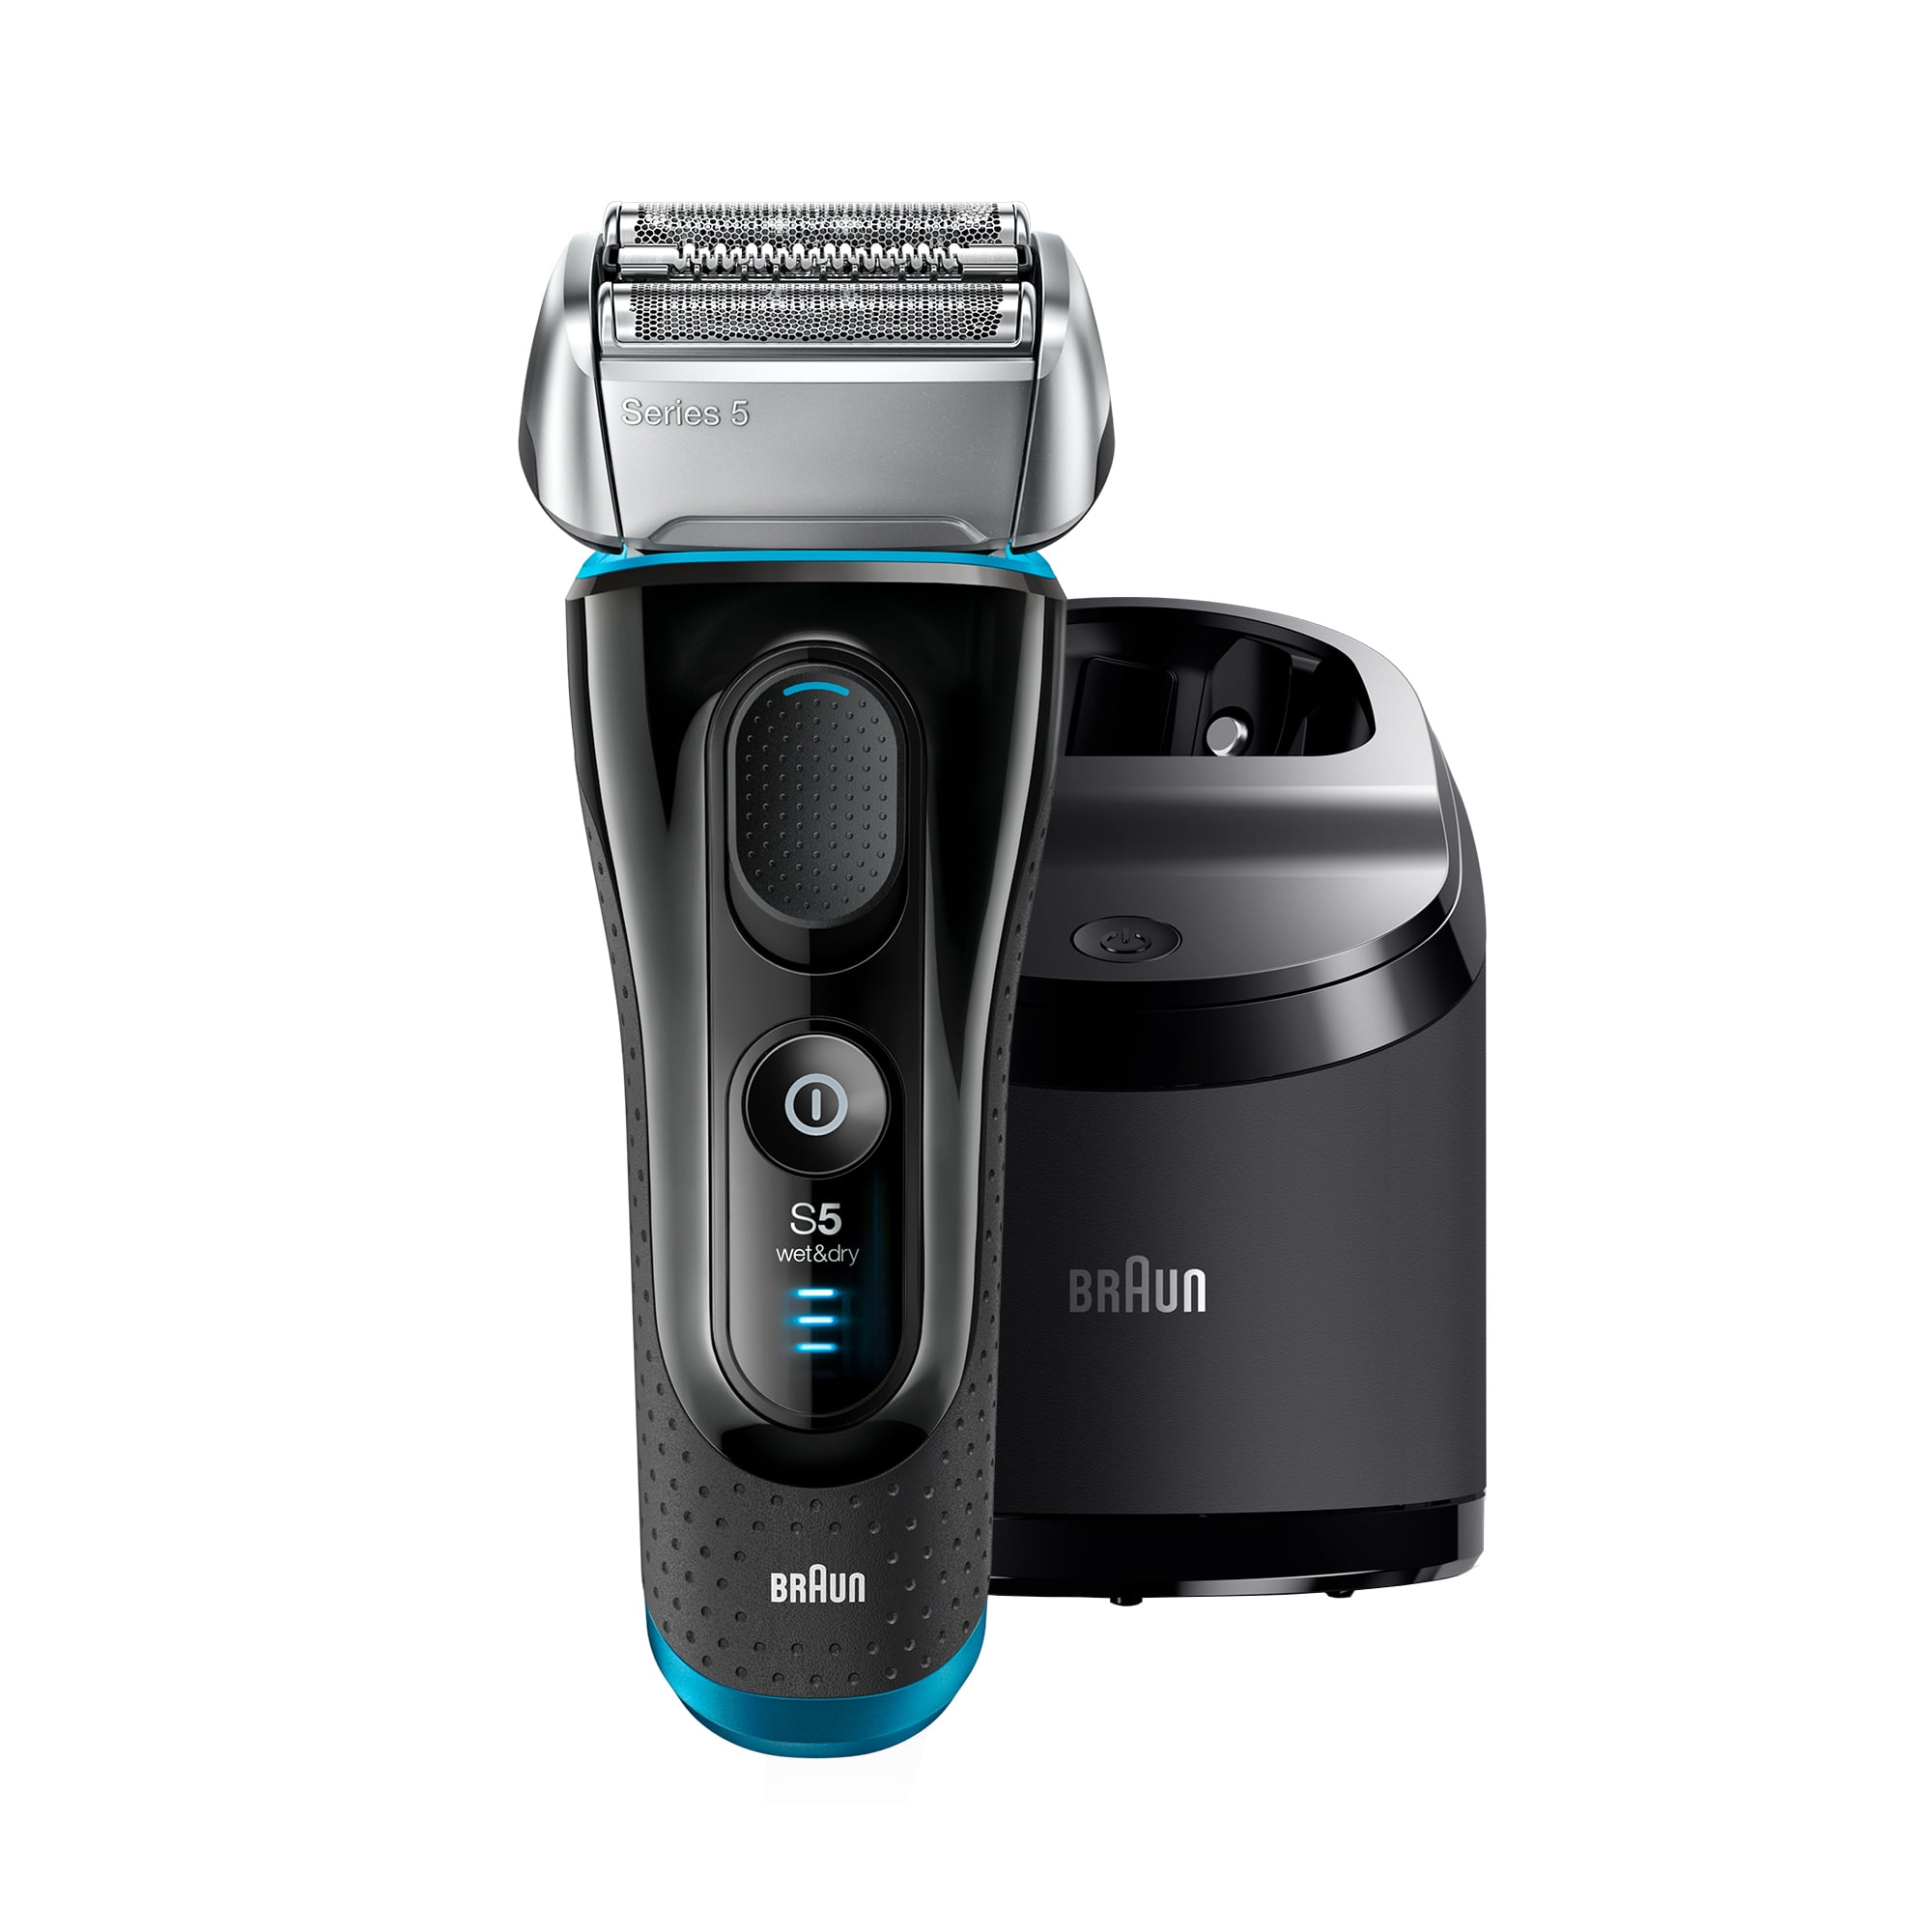 Voller Produkte! Braun Series Dry 5190cc Mens Shaver with Station Wet 5 Electric Clean